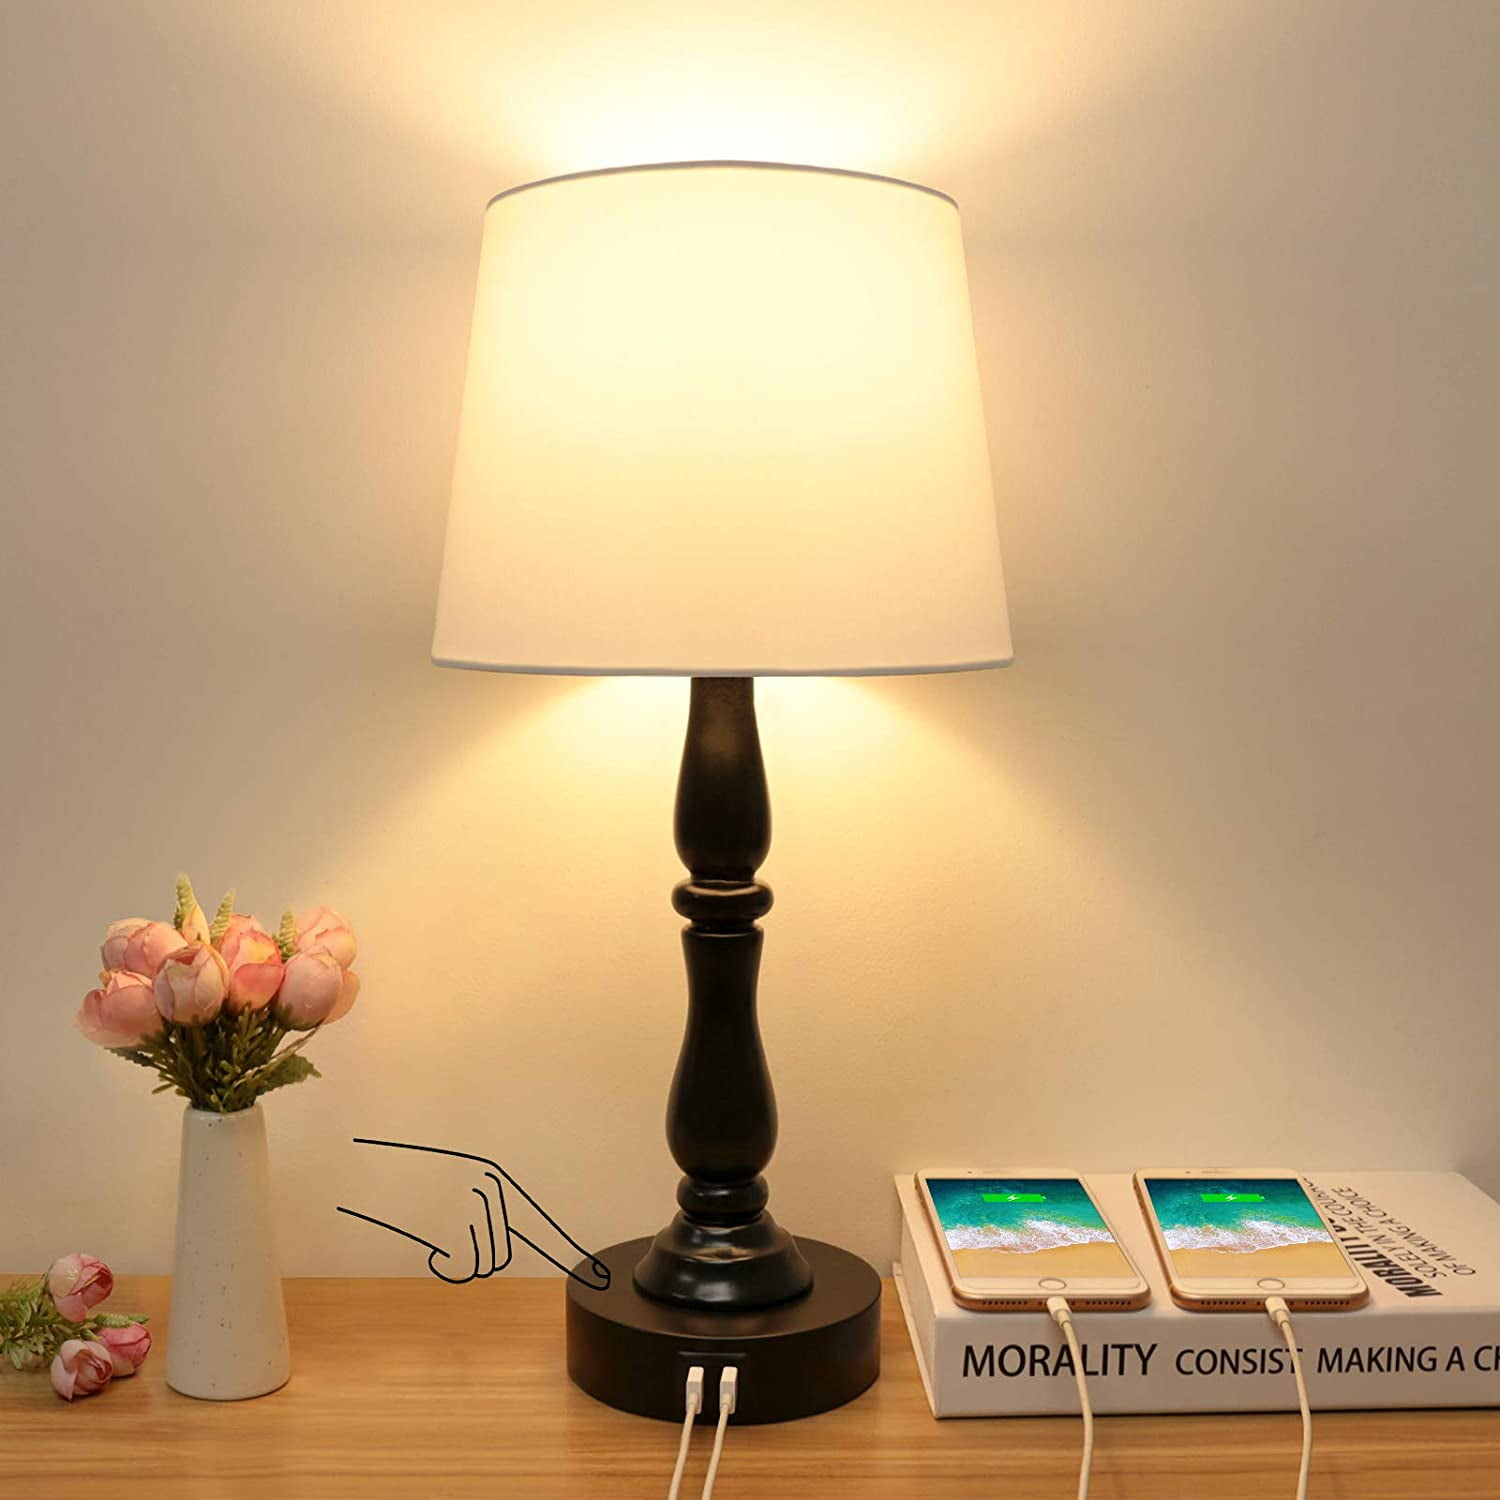 Touch Table Lamp with 2 USB Ports, Boncoo 3 Way Dimmable Bedside Lamp